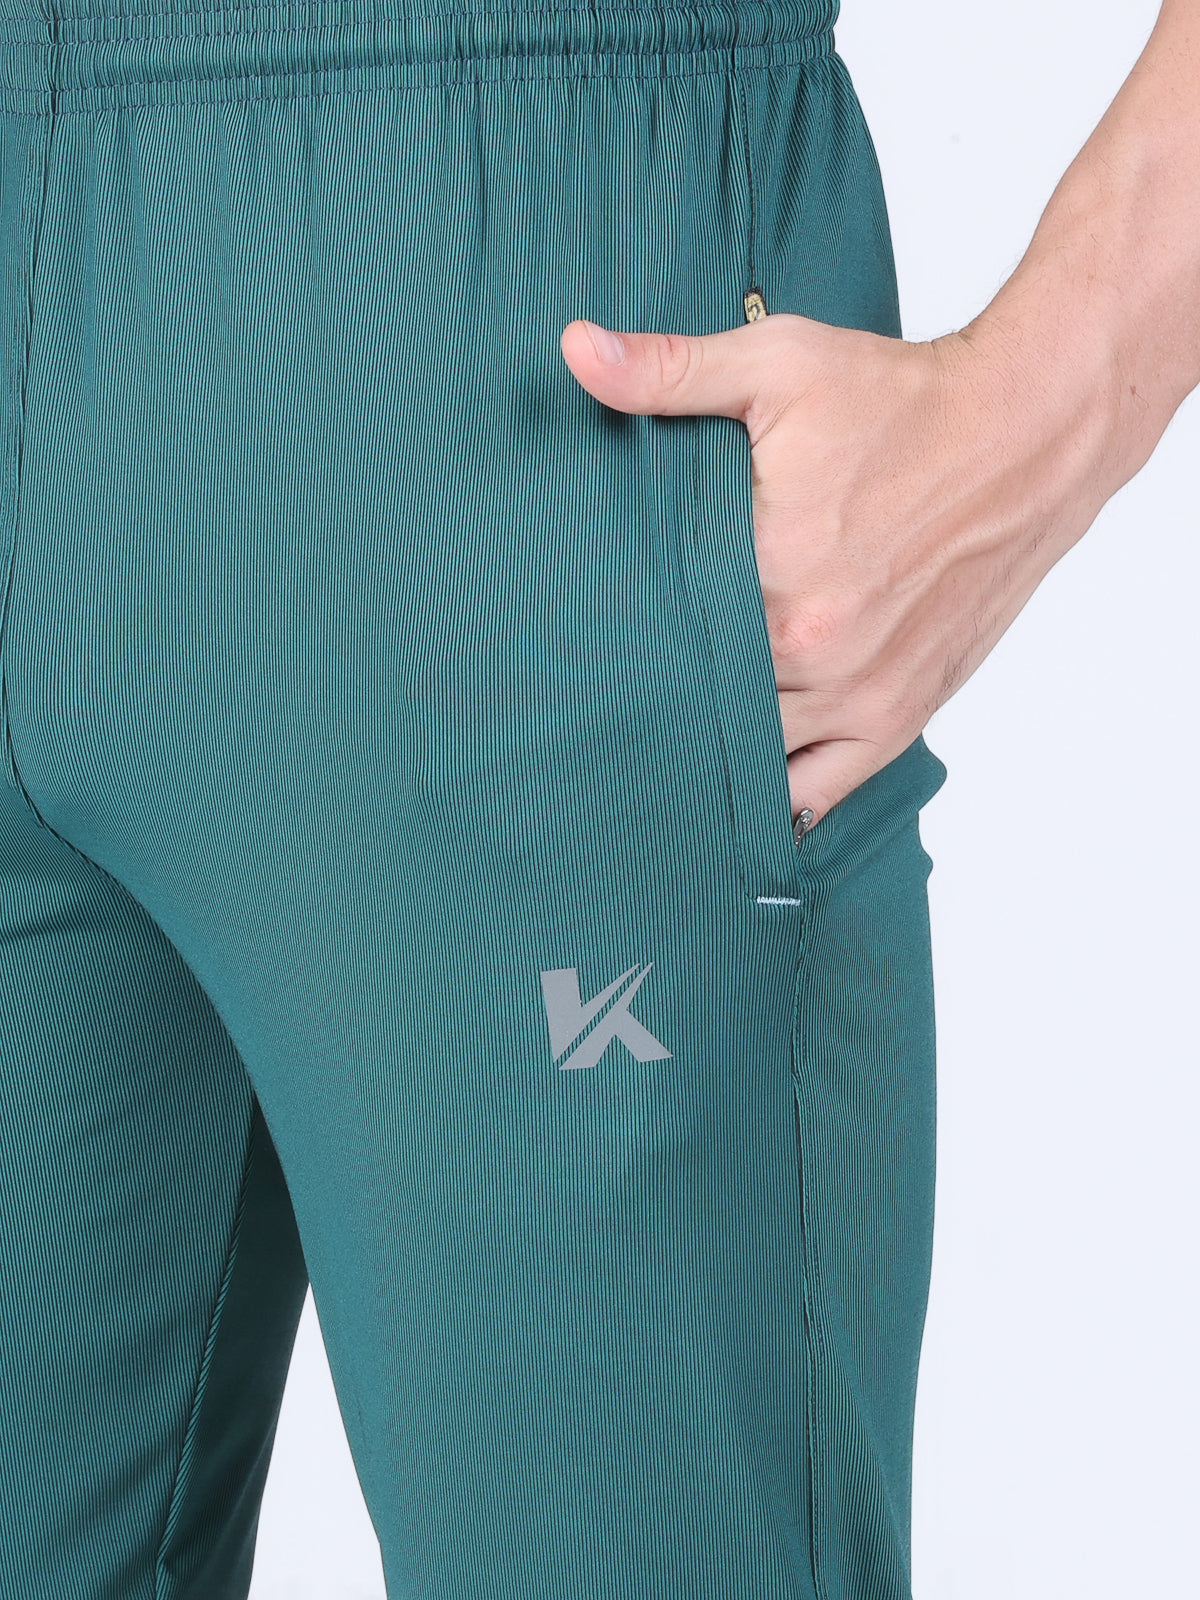 Combo of 2 Men's 4 Way Stretch Lining Bottle Green and Tourquoise Track Pant